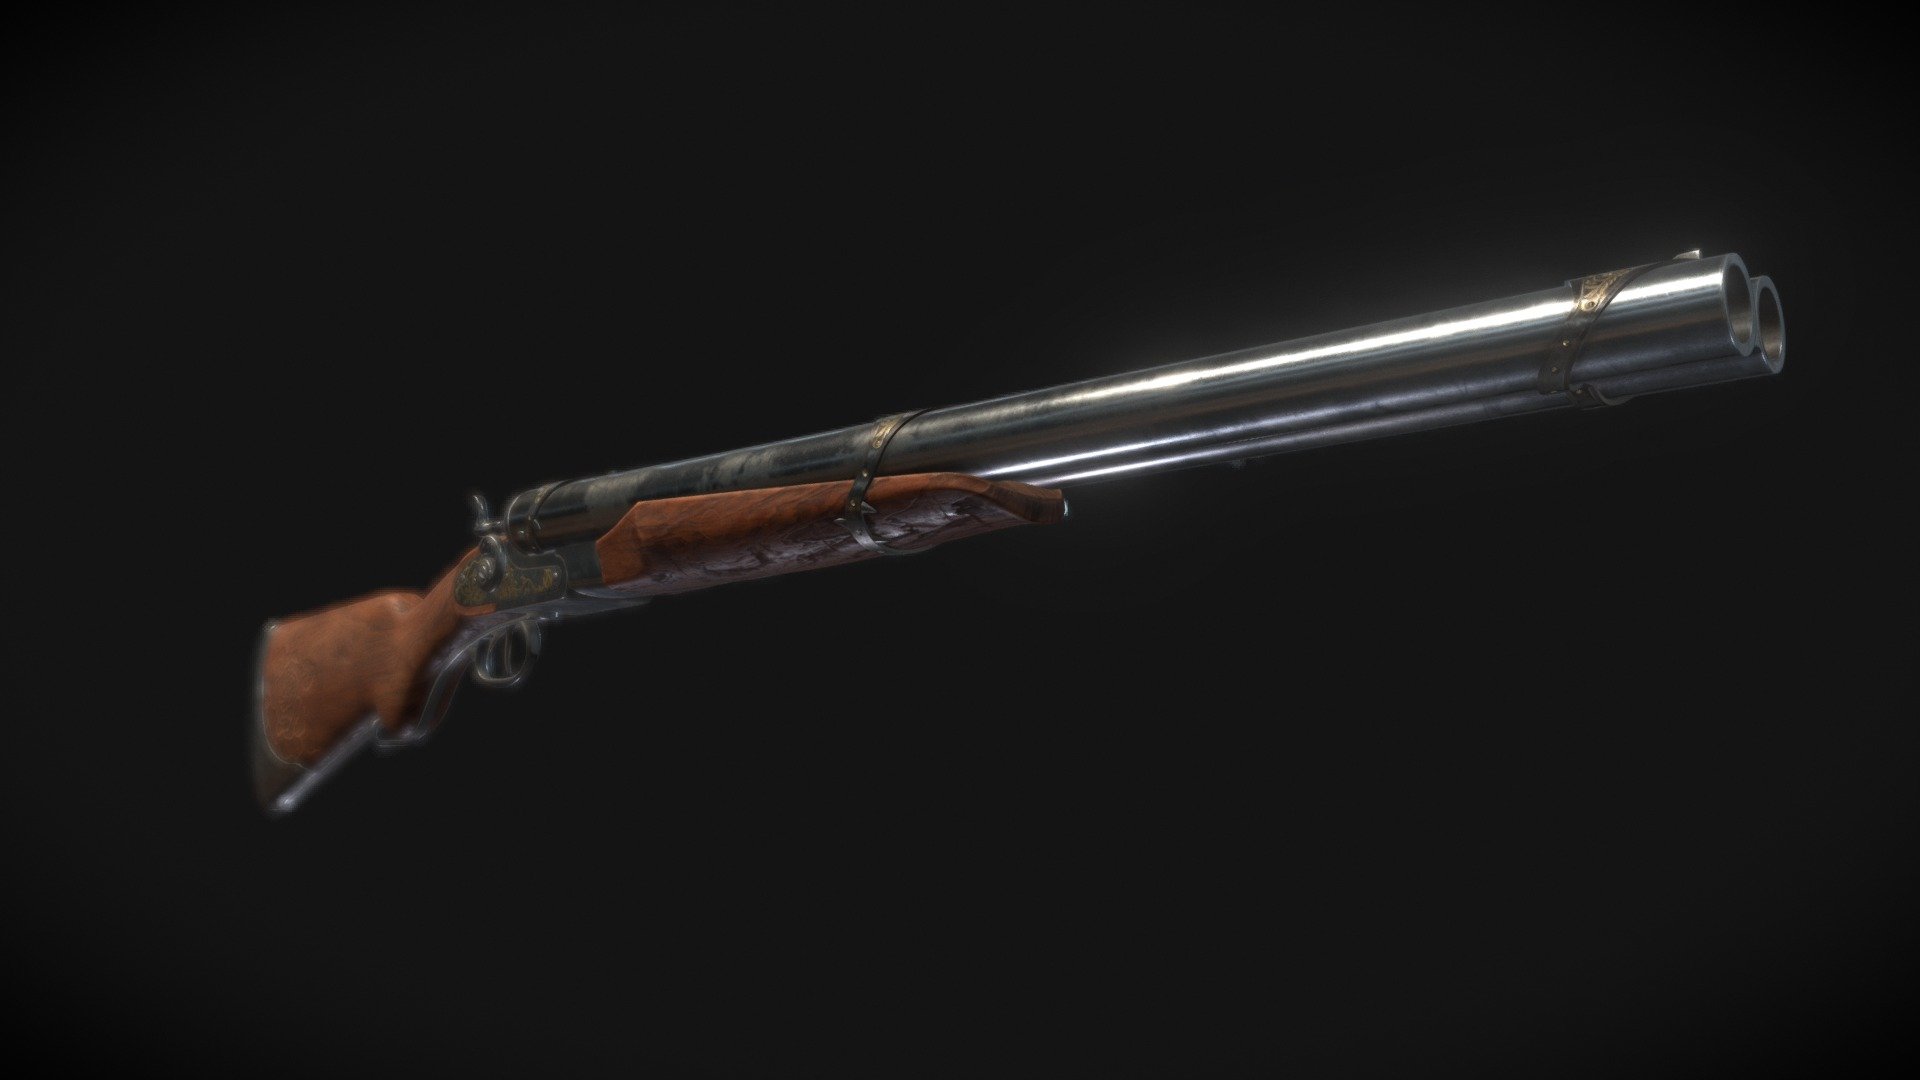 Stagecoach Double barrel Shotgun

Game ready - Set up to be animated - Stagecoach Shotgun - Buy Royalty Free 3D model by elijahcobden 3d model